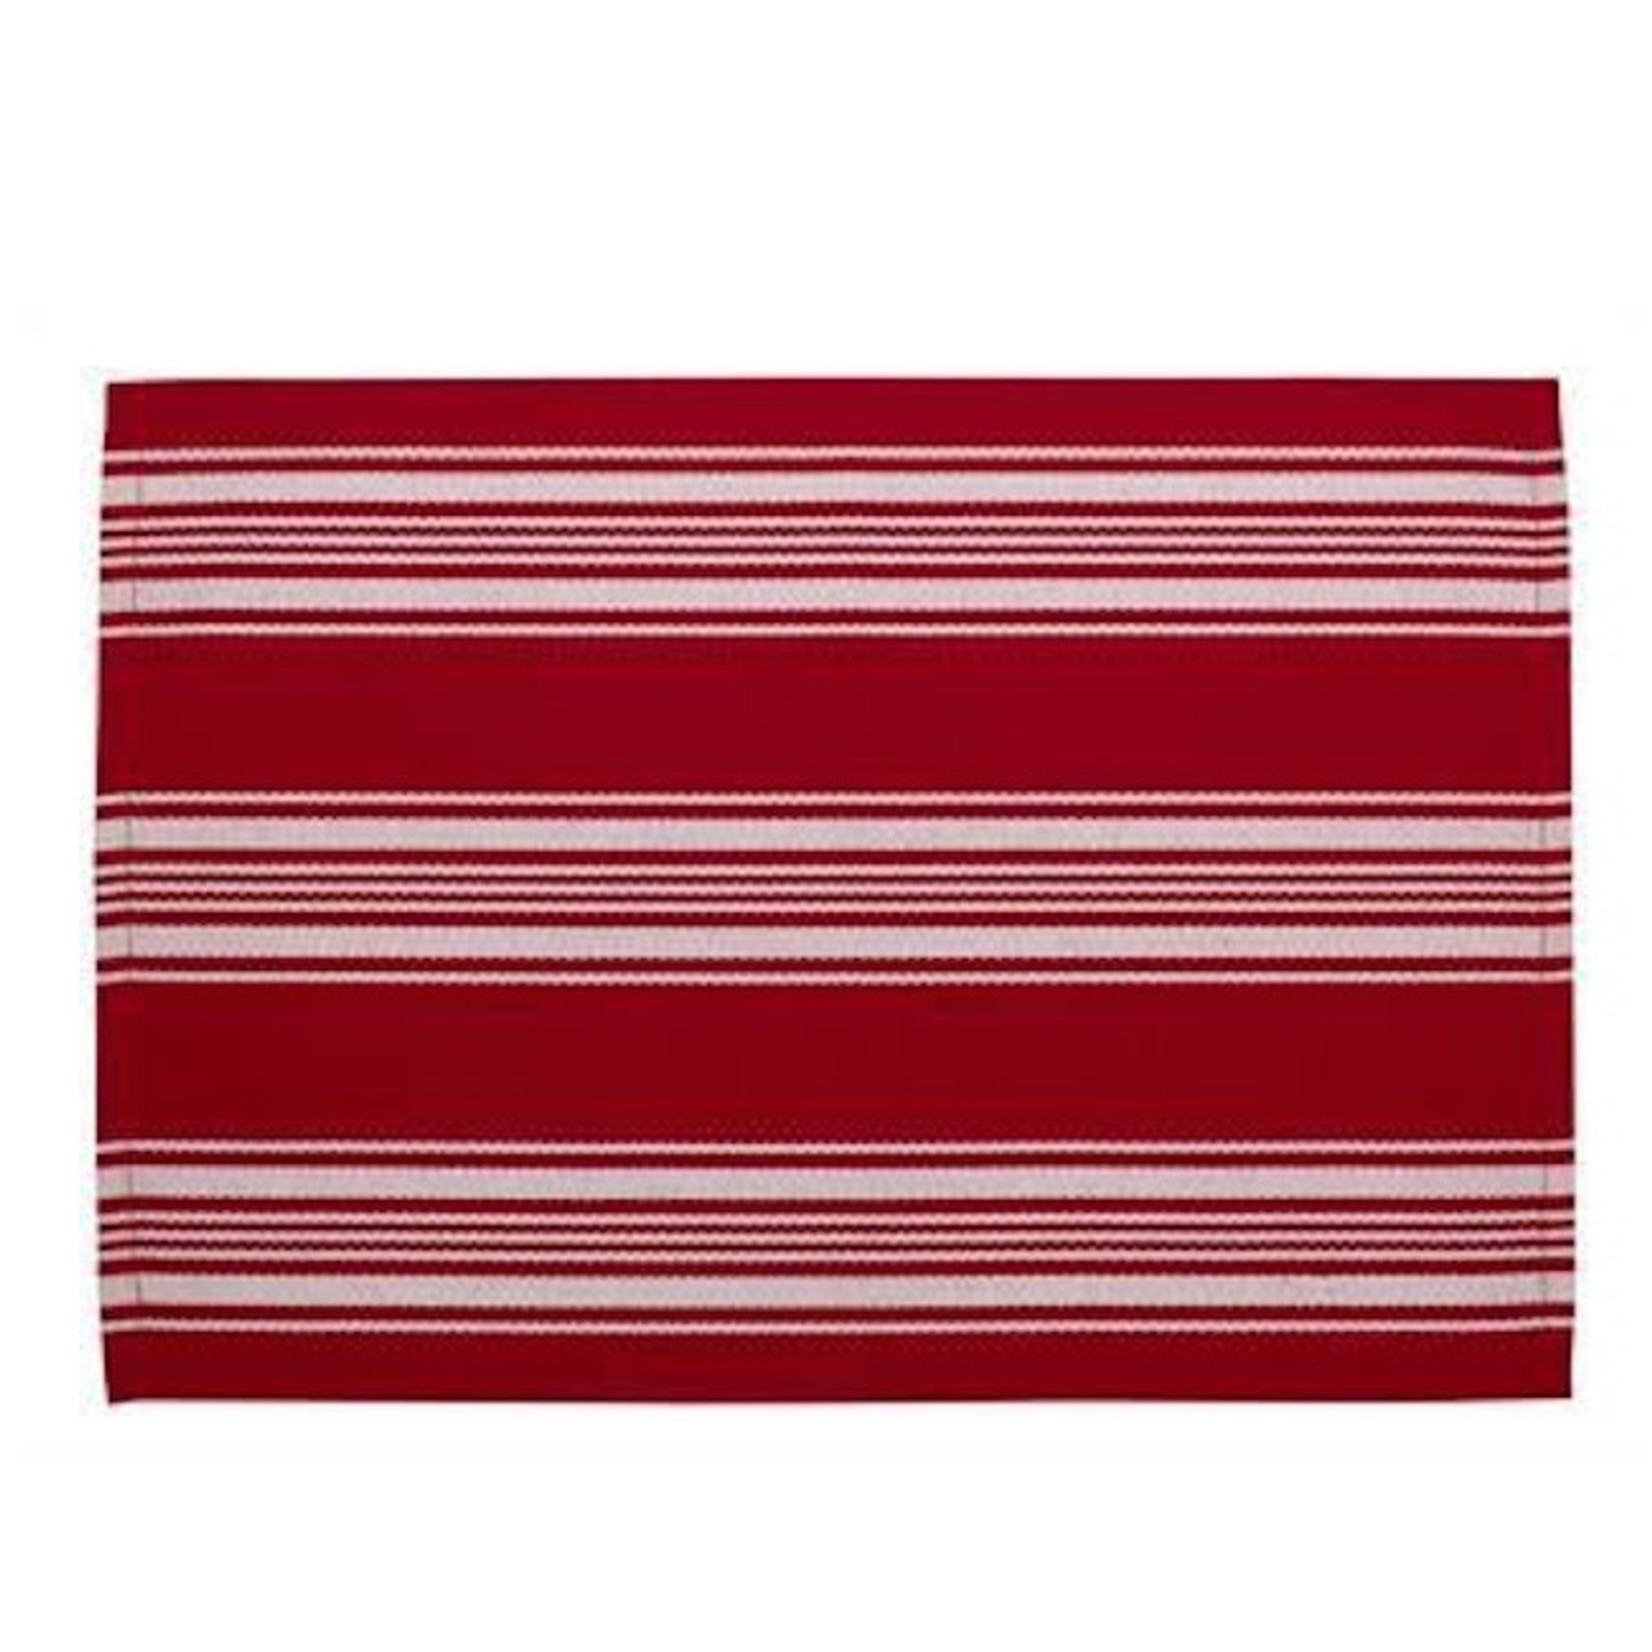 Texstyles Deco Placemat Red Stripe 13"x19"